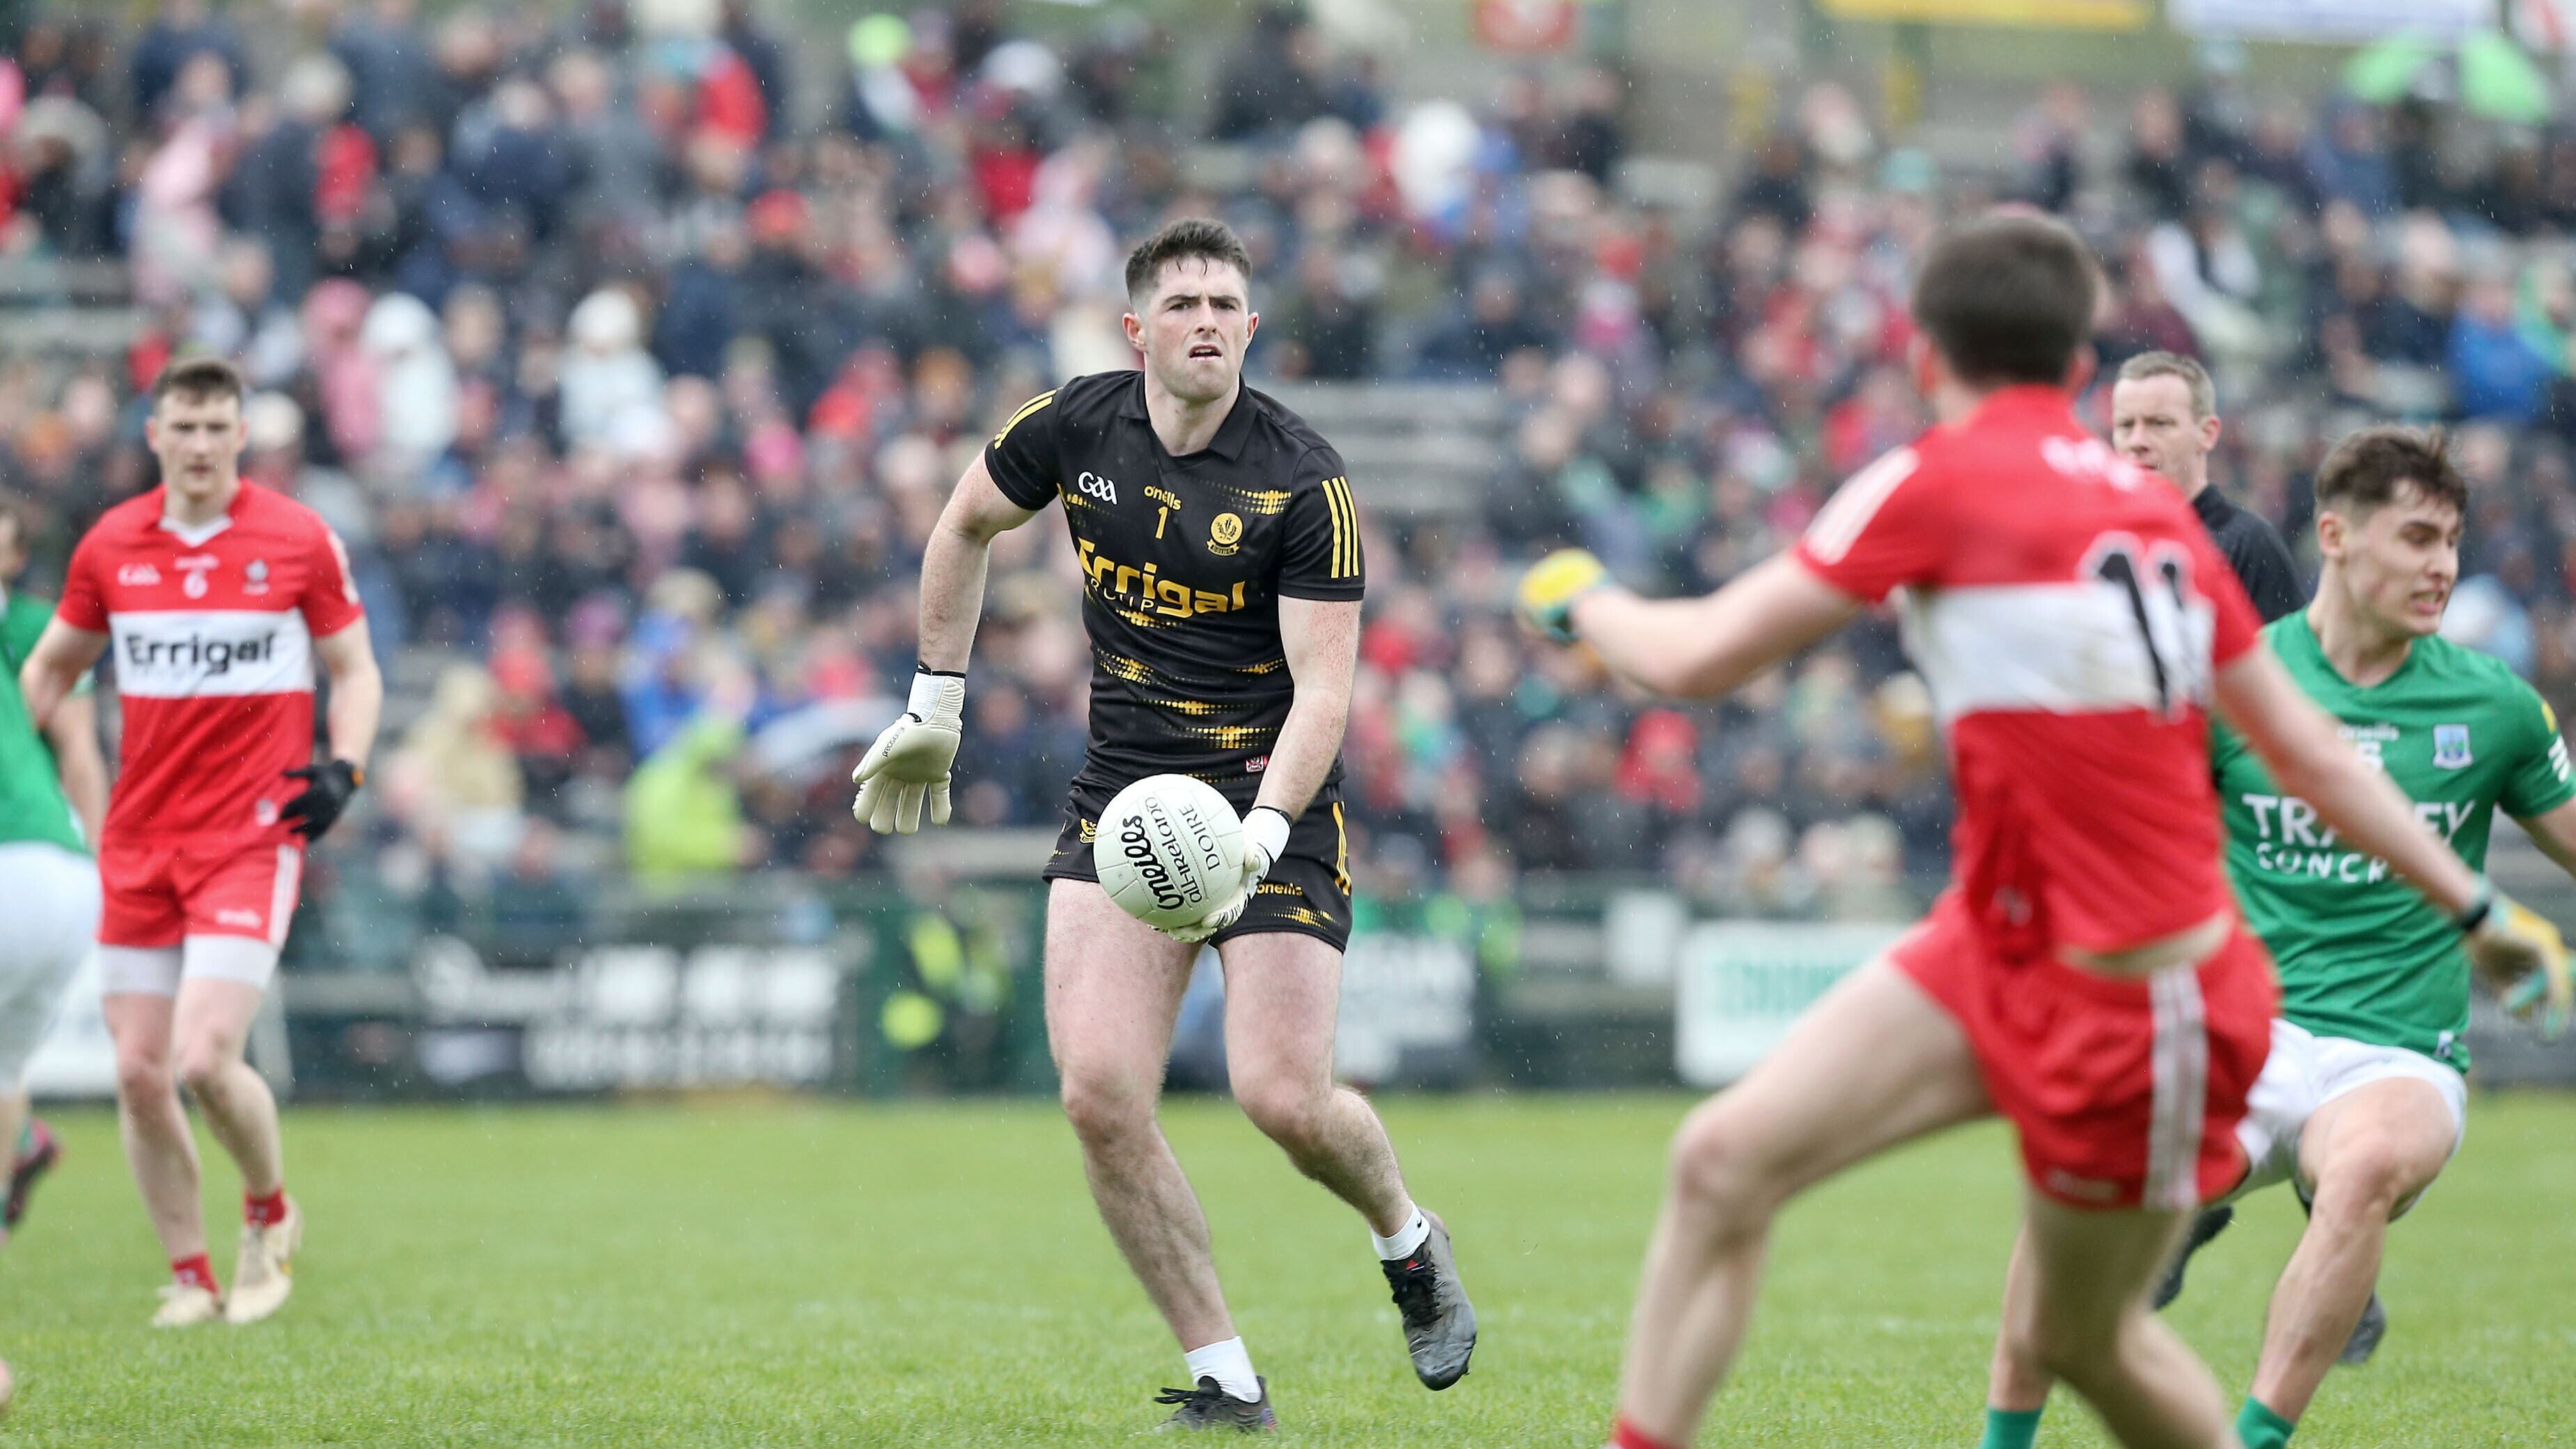 Odhran Lynch has become a vital cog in Derry's attacking strategy